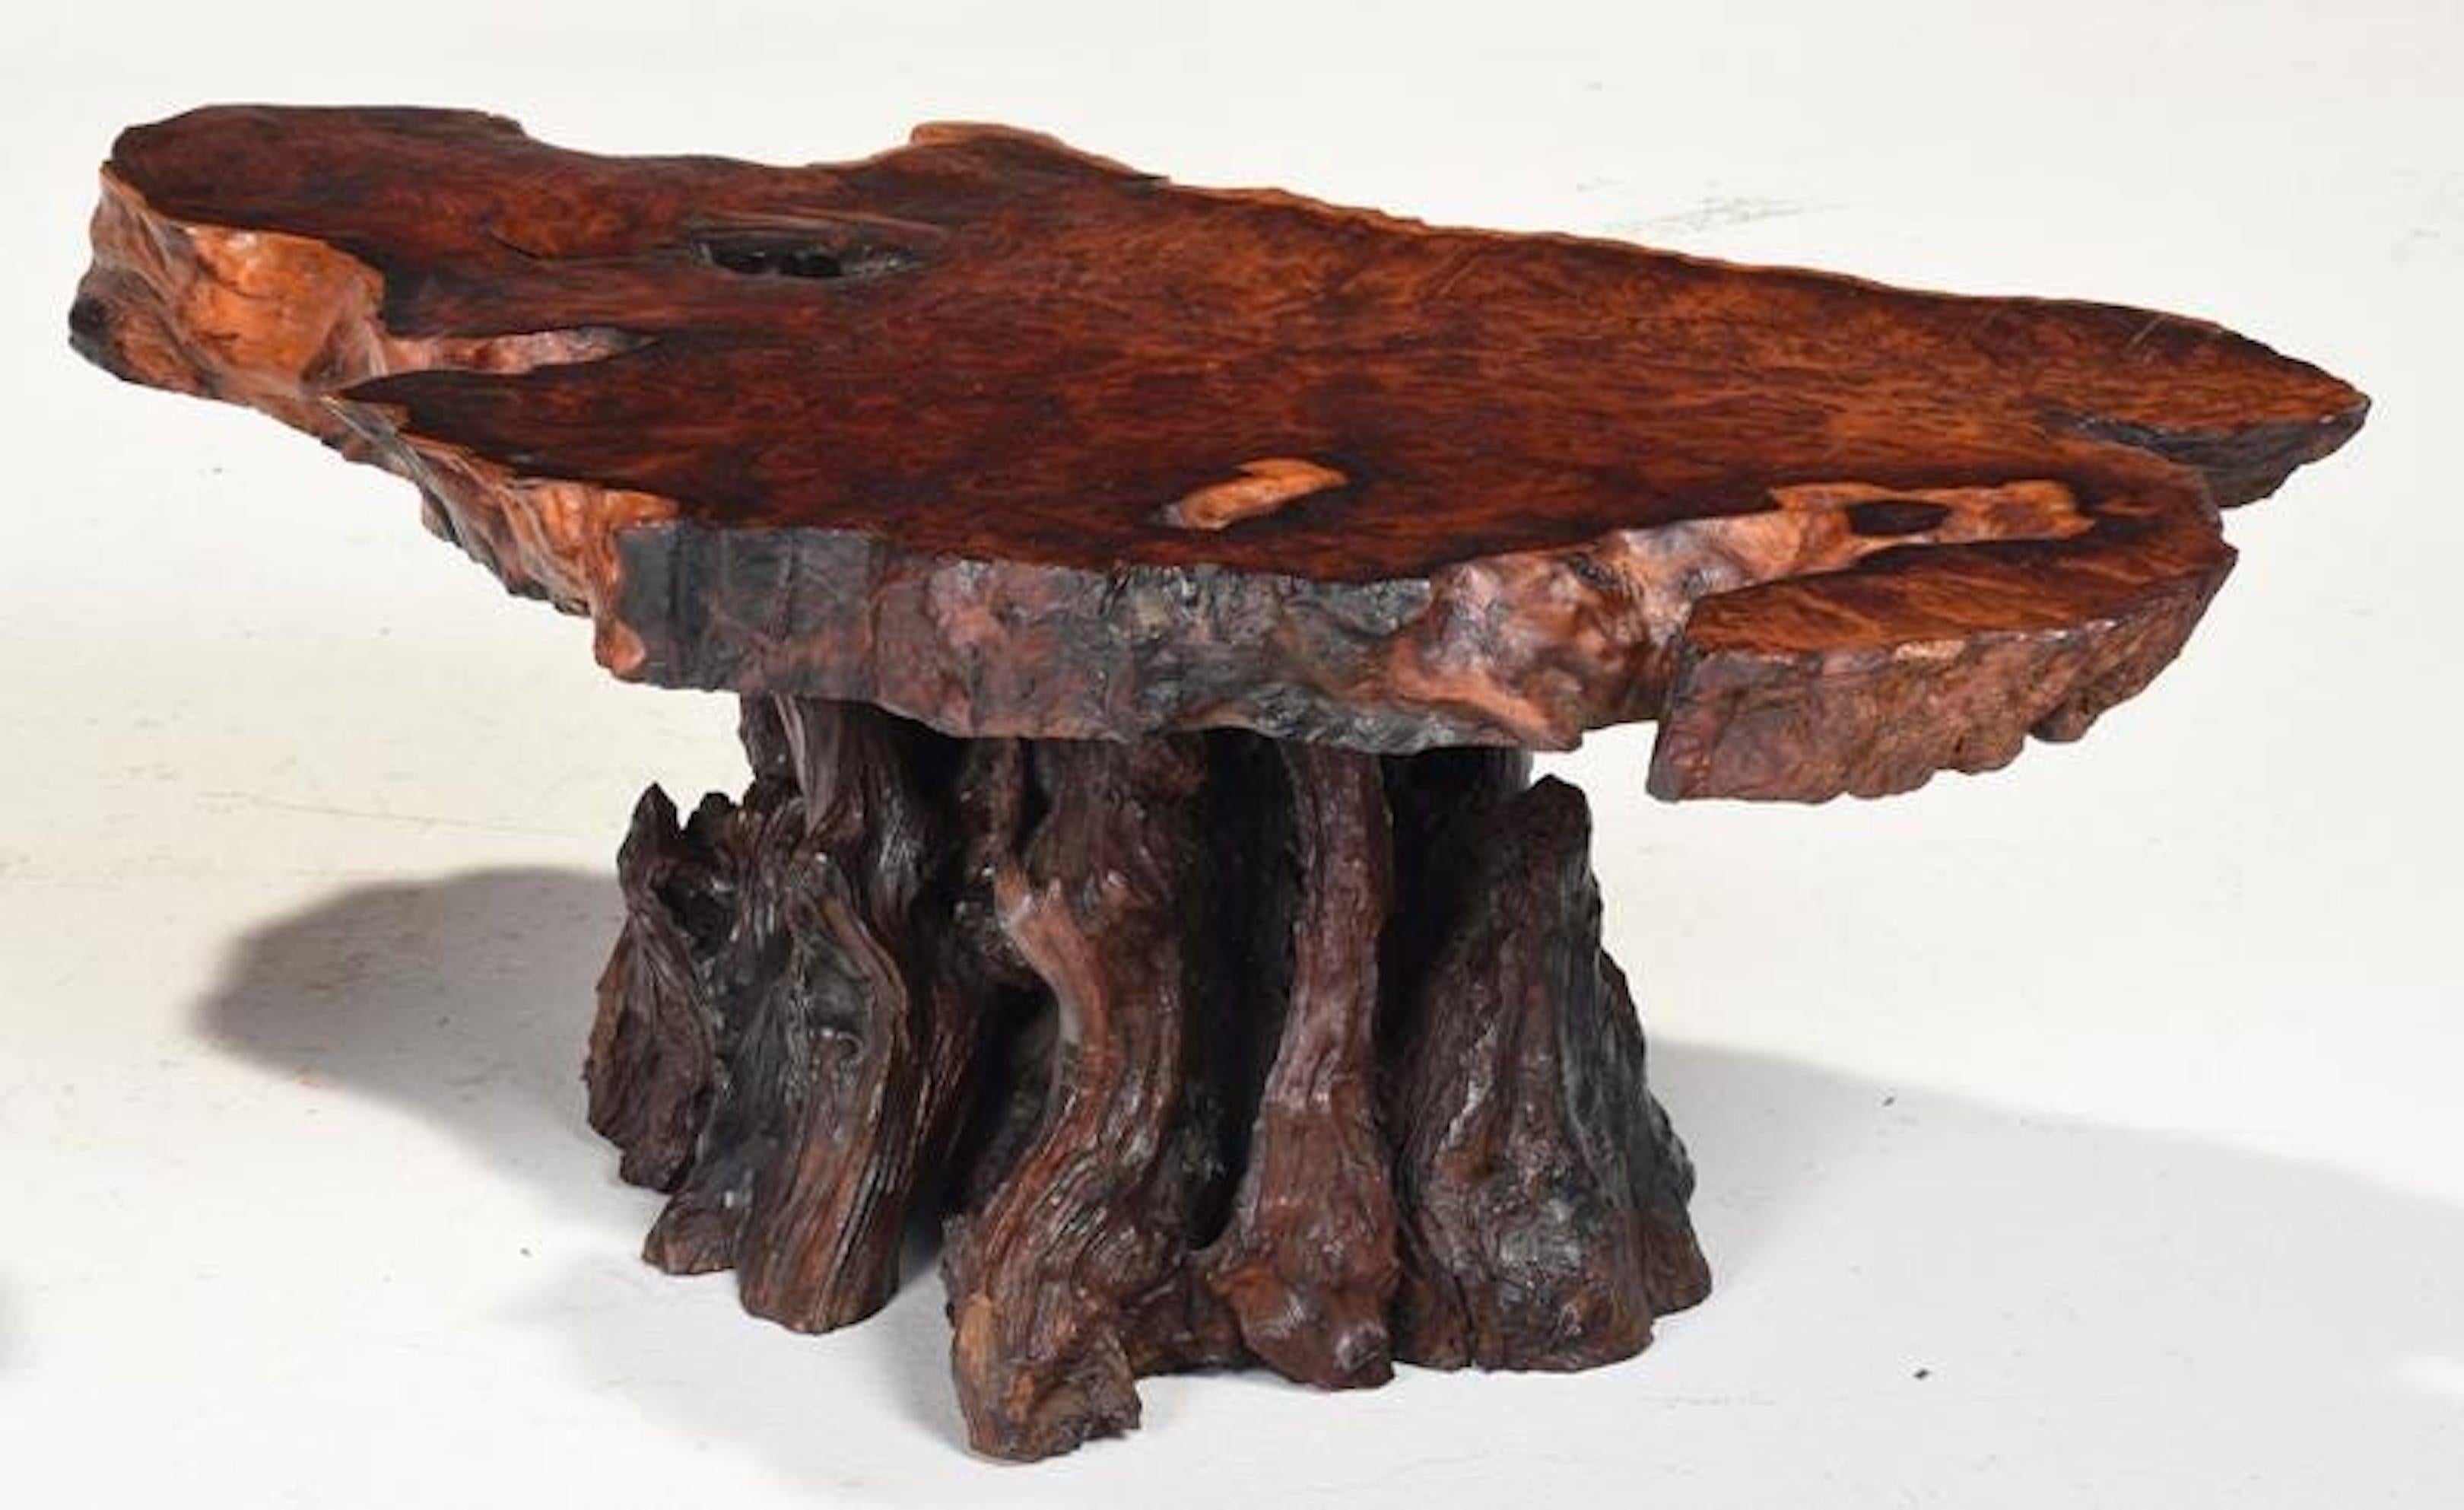 Modern Burl live edge coffee table, smaller
With thick natural live edge specimen burlwood, raised on natural root base. 
At the time of posting we have two similar tables, this work is slightly smaller, the larger table is LU1943324840802.
 